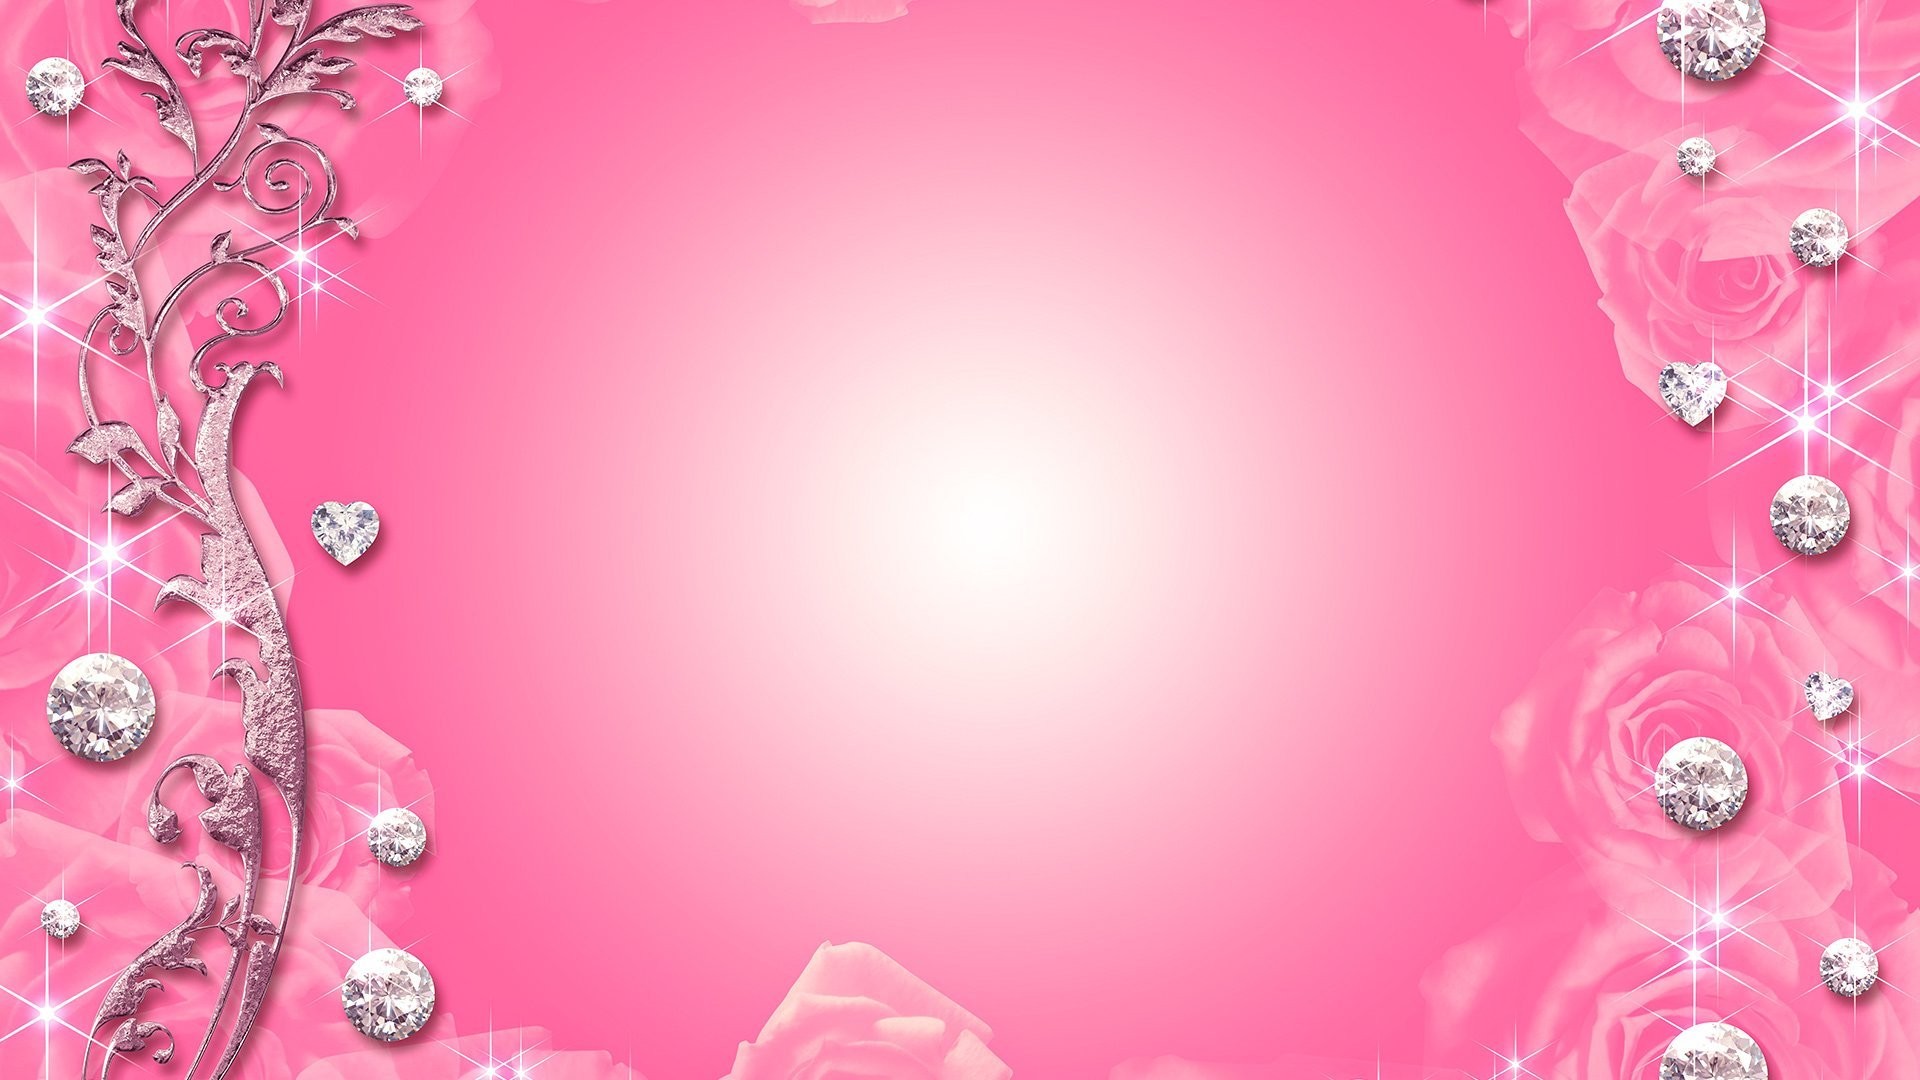 Pink Backgrounds | Wallpapers, Backgrounds, Images, Art Photos.